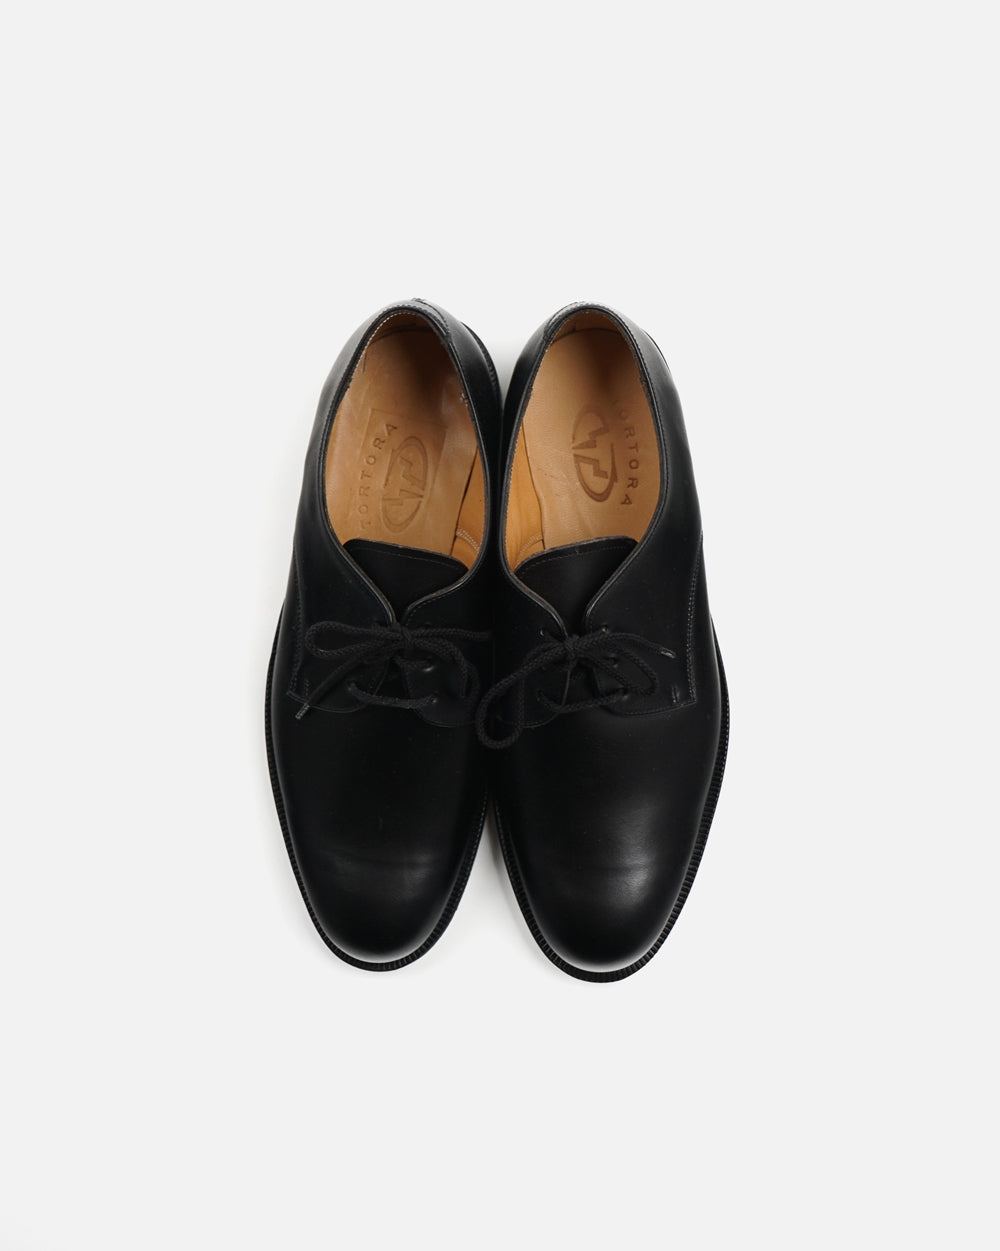 French Military Oxford Dress Shoes